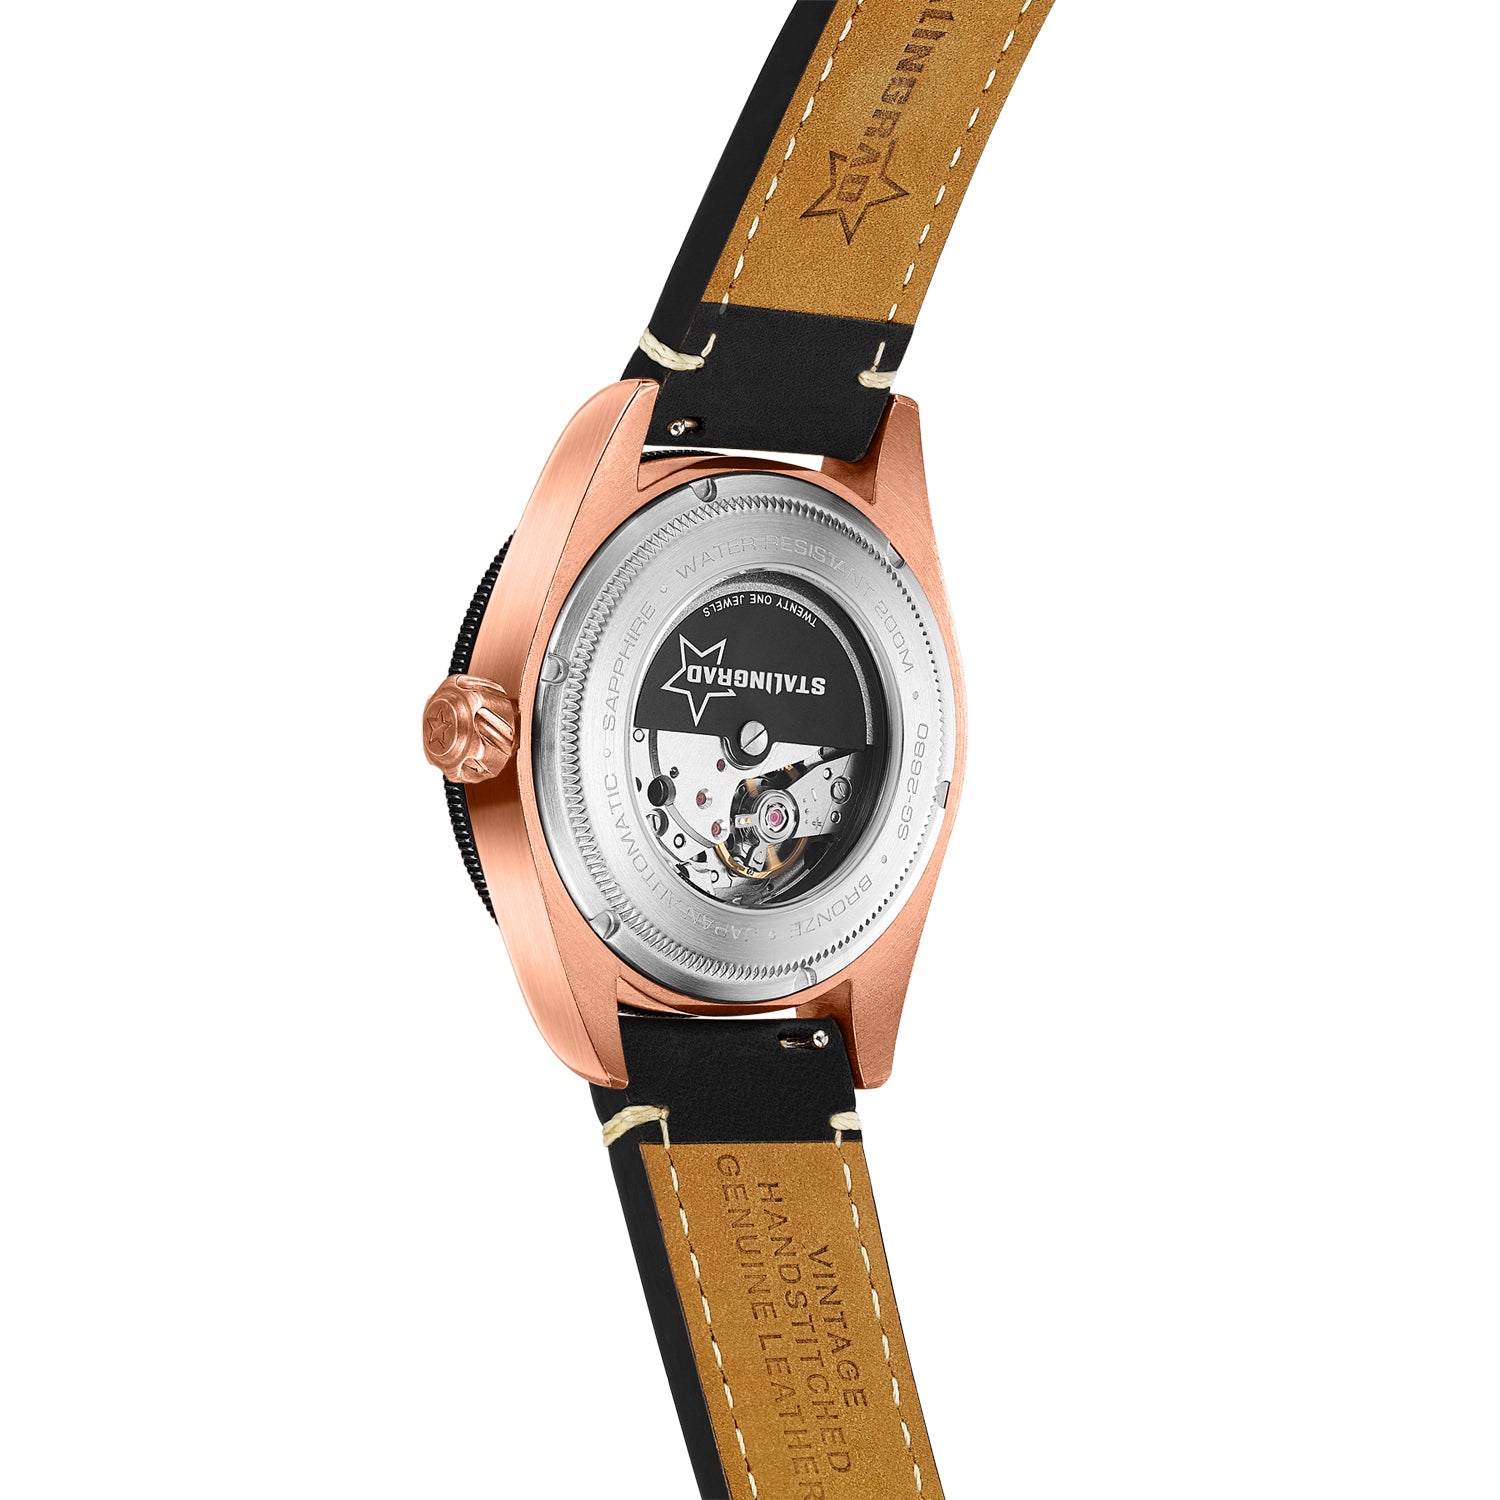 Stalingrad's  Commander Automatic Bronze Watch with Brass Bezel and Blue Dial with display caseback view on a white background